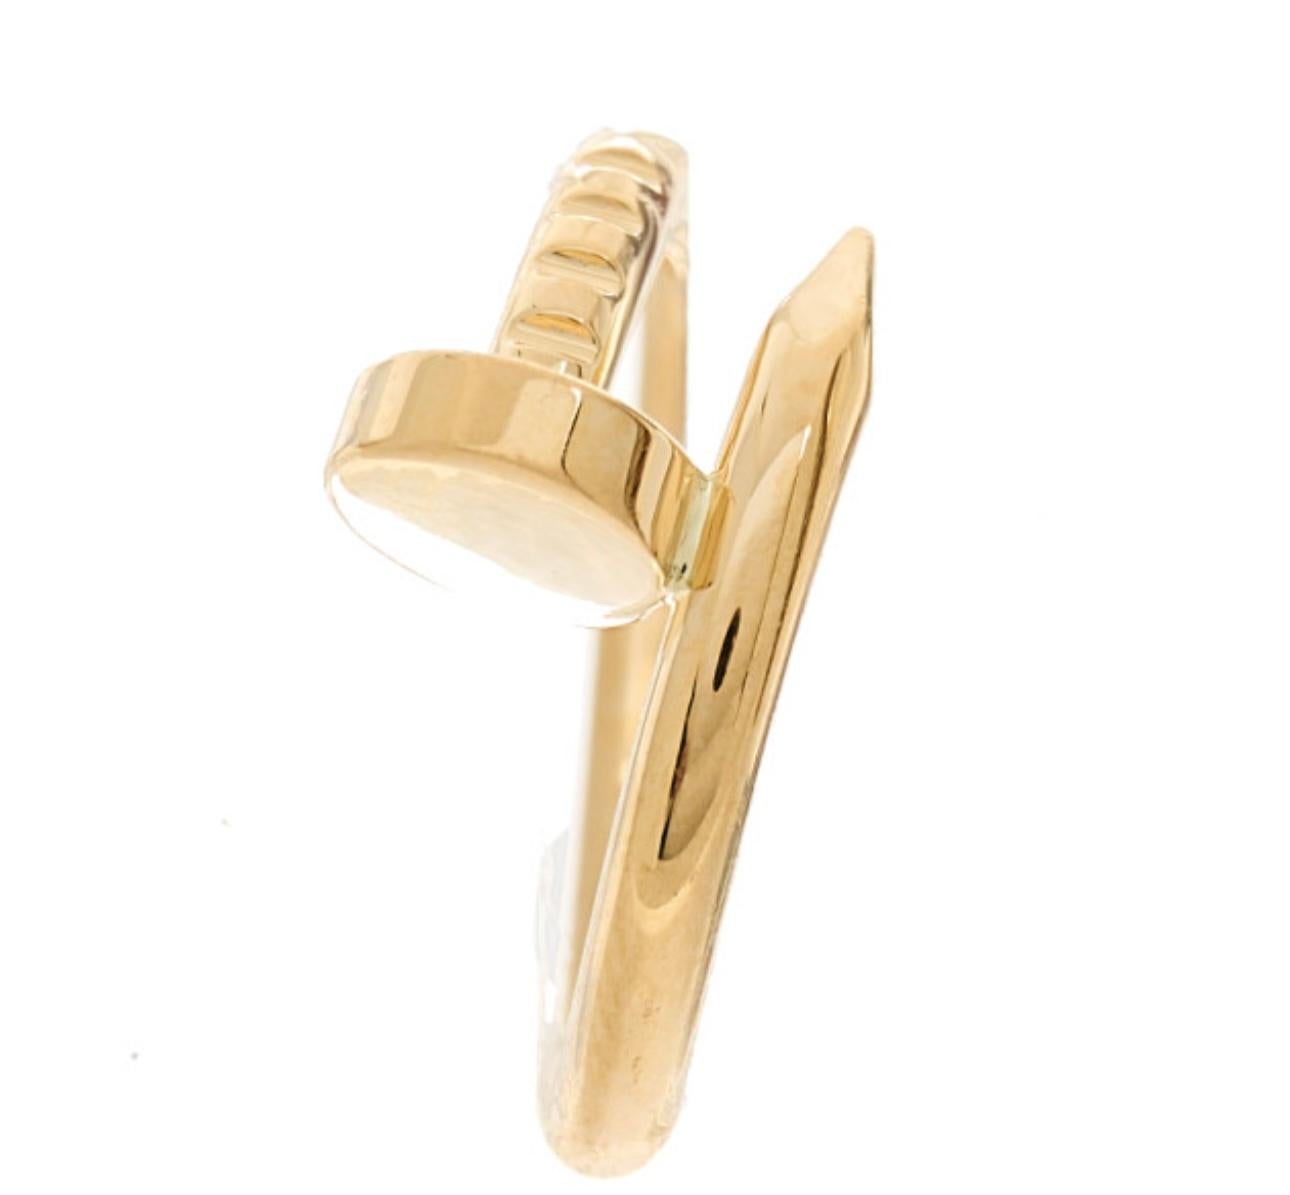 Cartier Just Ankle Nail Ring SYZ313 18k Gelbgold AU750 AUTHENTIC  Zertifikat im Angebot 6